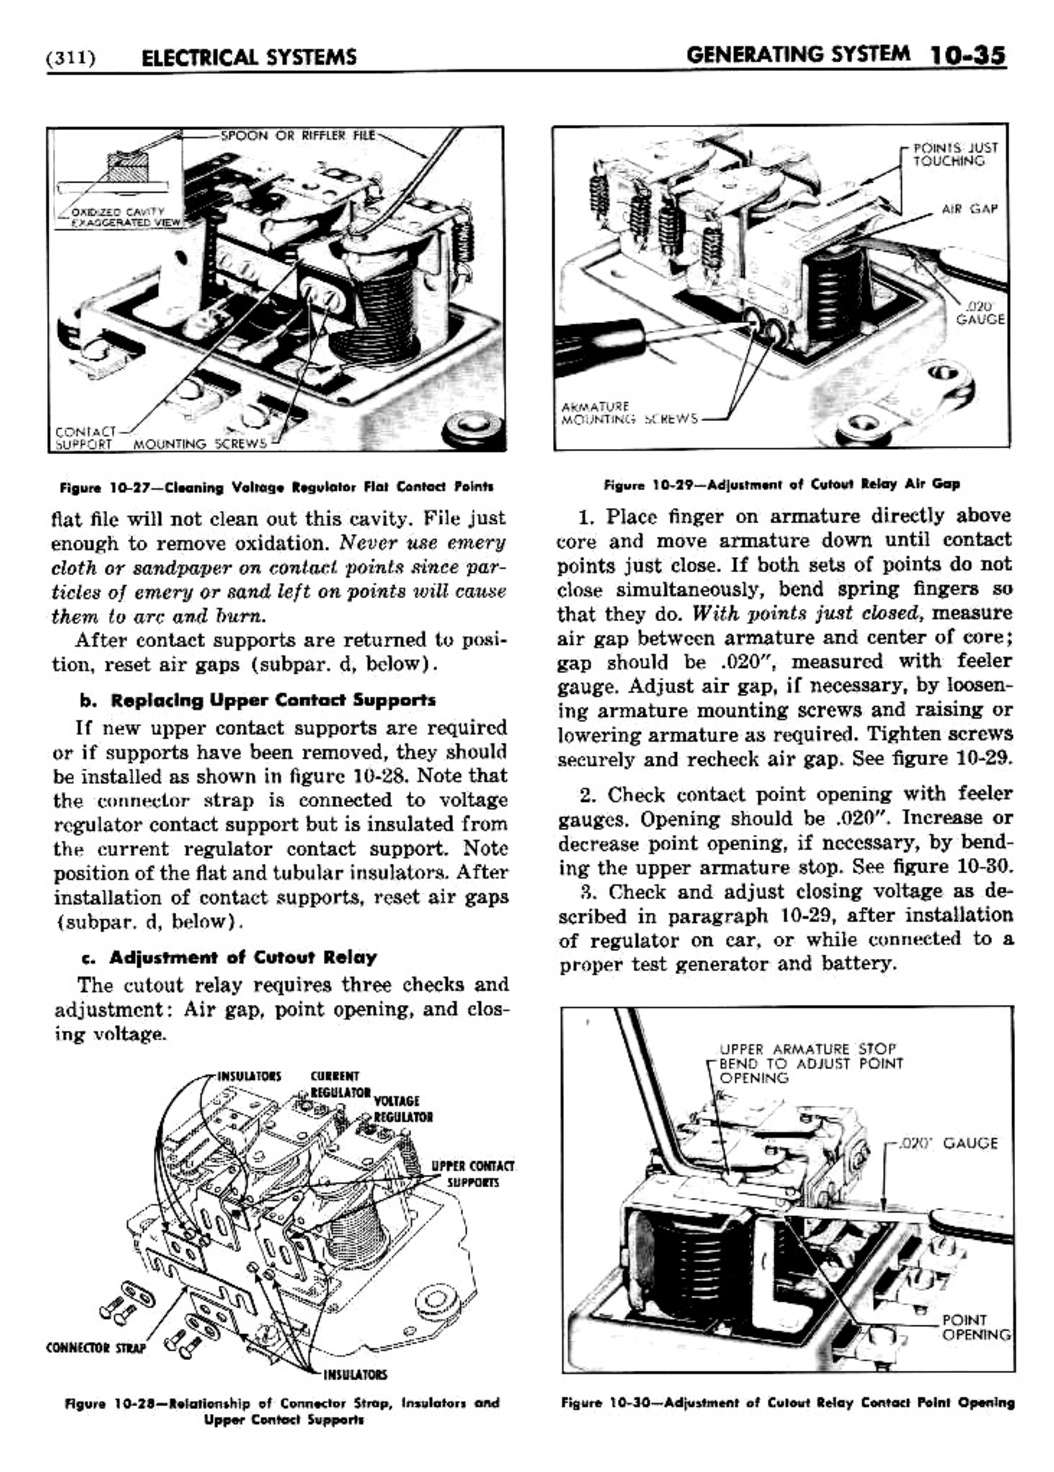 n_11 1948 Buick Shop Manual - Electrical Systems-035-035.jpg